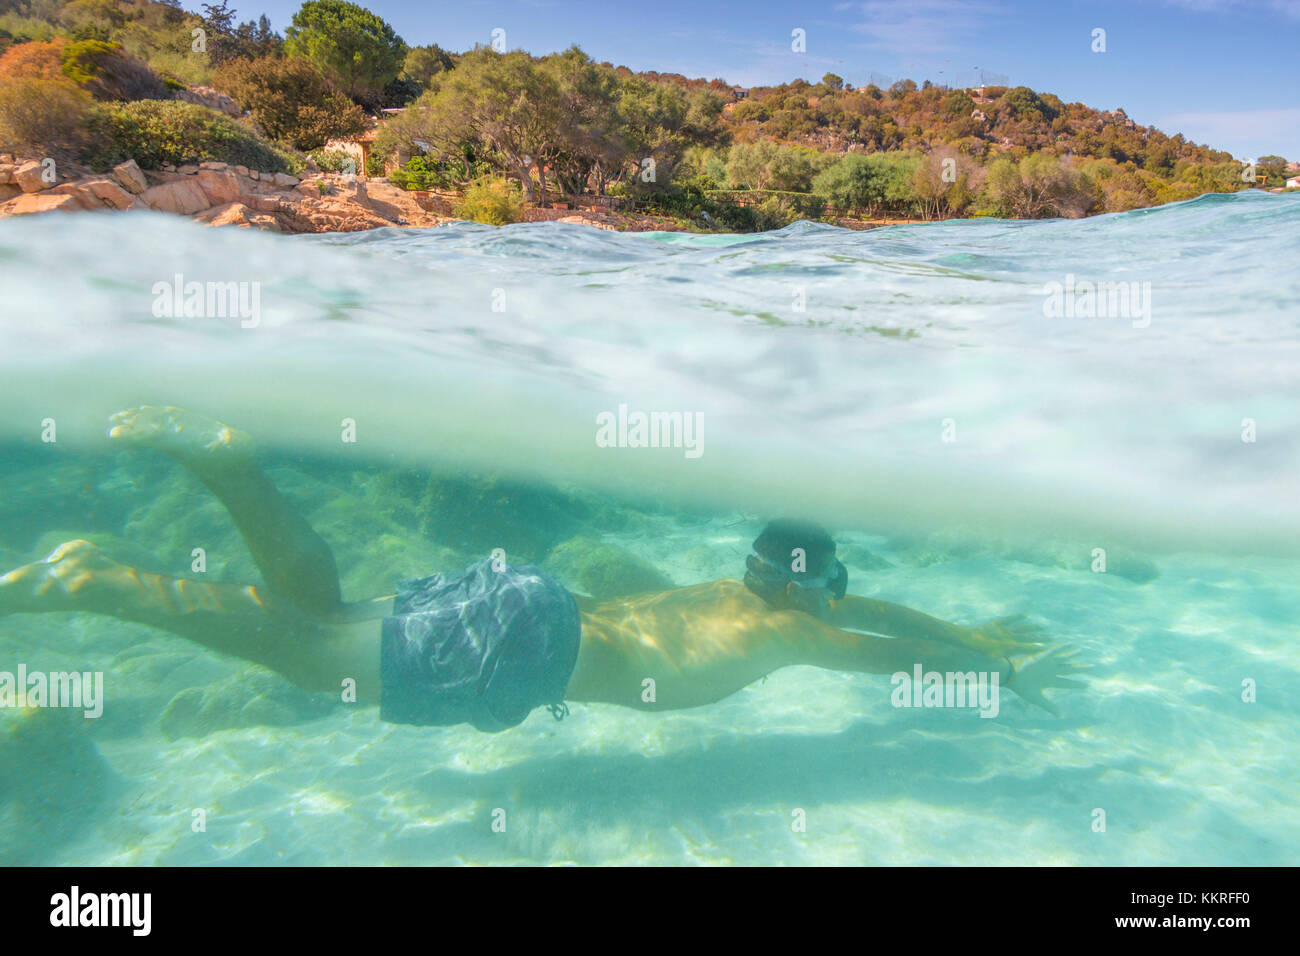 Snorkeling in the turquoise water in Marinella (Olbia), Olbia-Tempio province, Sardinia district, Italy Stock Photo